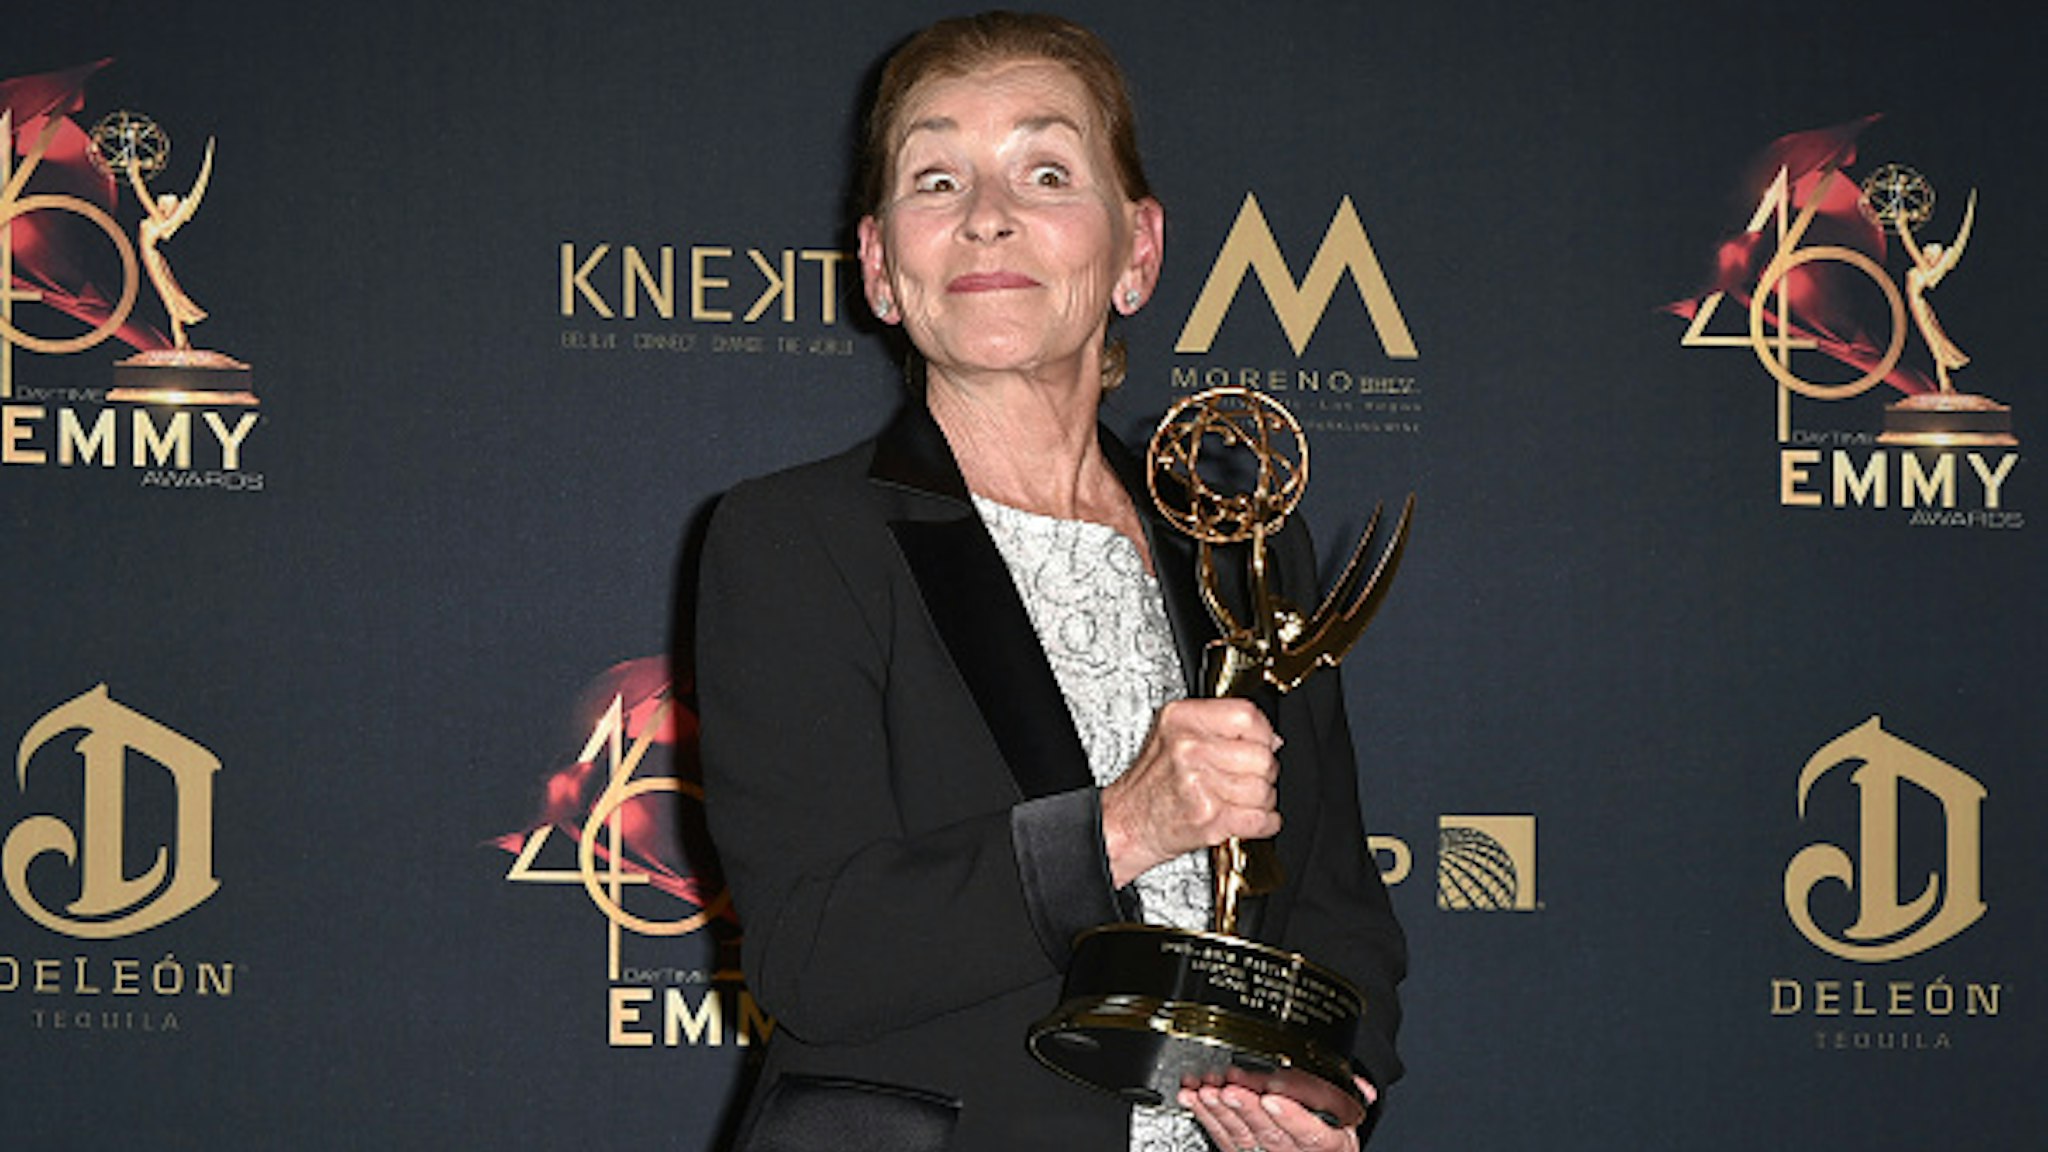 Judge Judy Sheindlin, with her Lifetime Achievement Award, attends the 46th Annual Daytime Emmy Awards - Press Room at Pasadena Civic Center on May 05, 2019 in Pasadena, California.